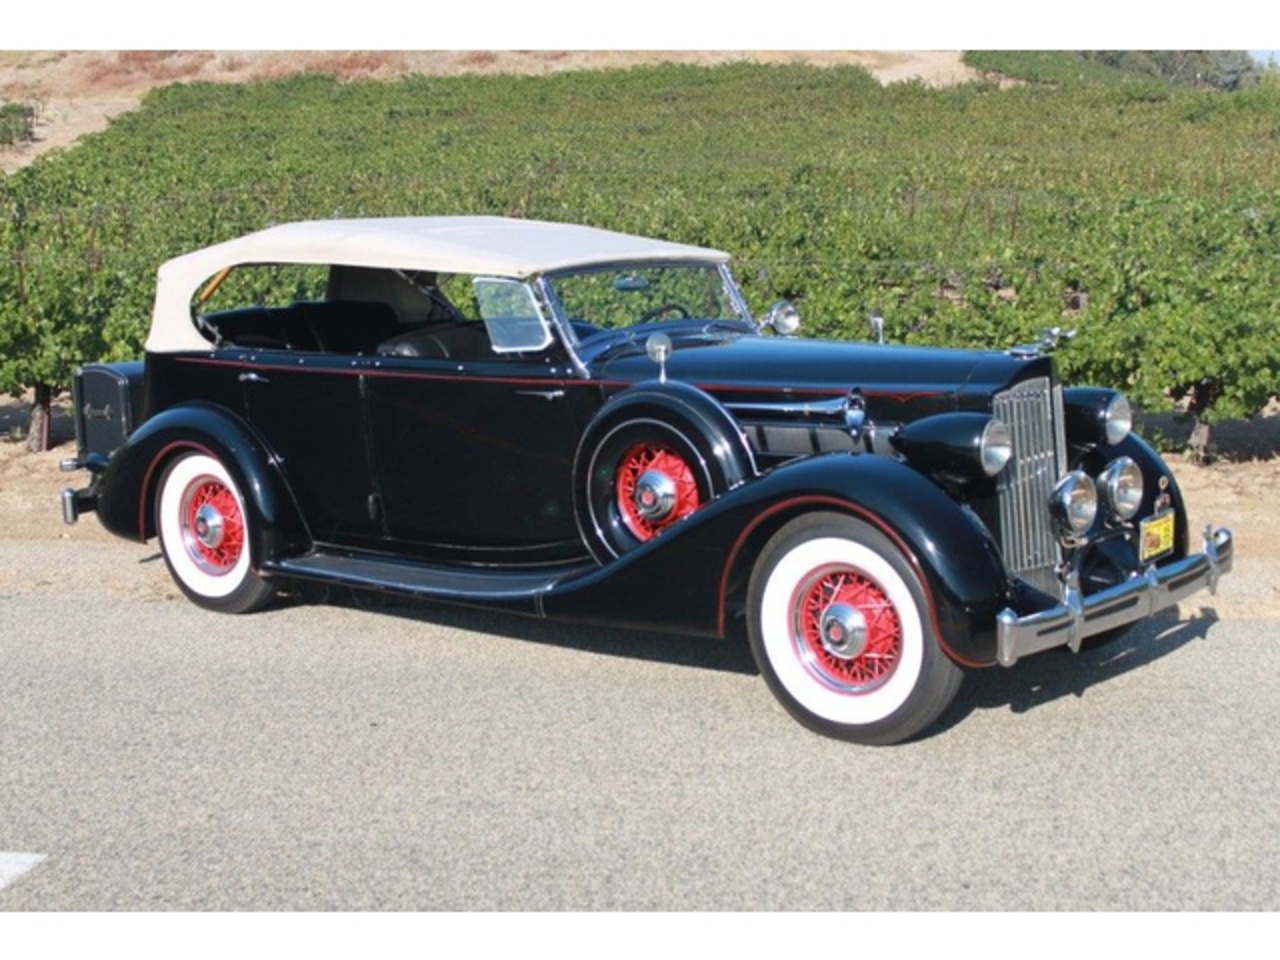 1935 Packard Eight, Phaeton - Rare Cars | Pictures and Reviews of ...